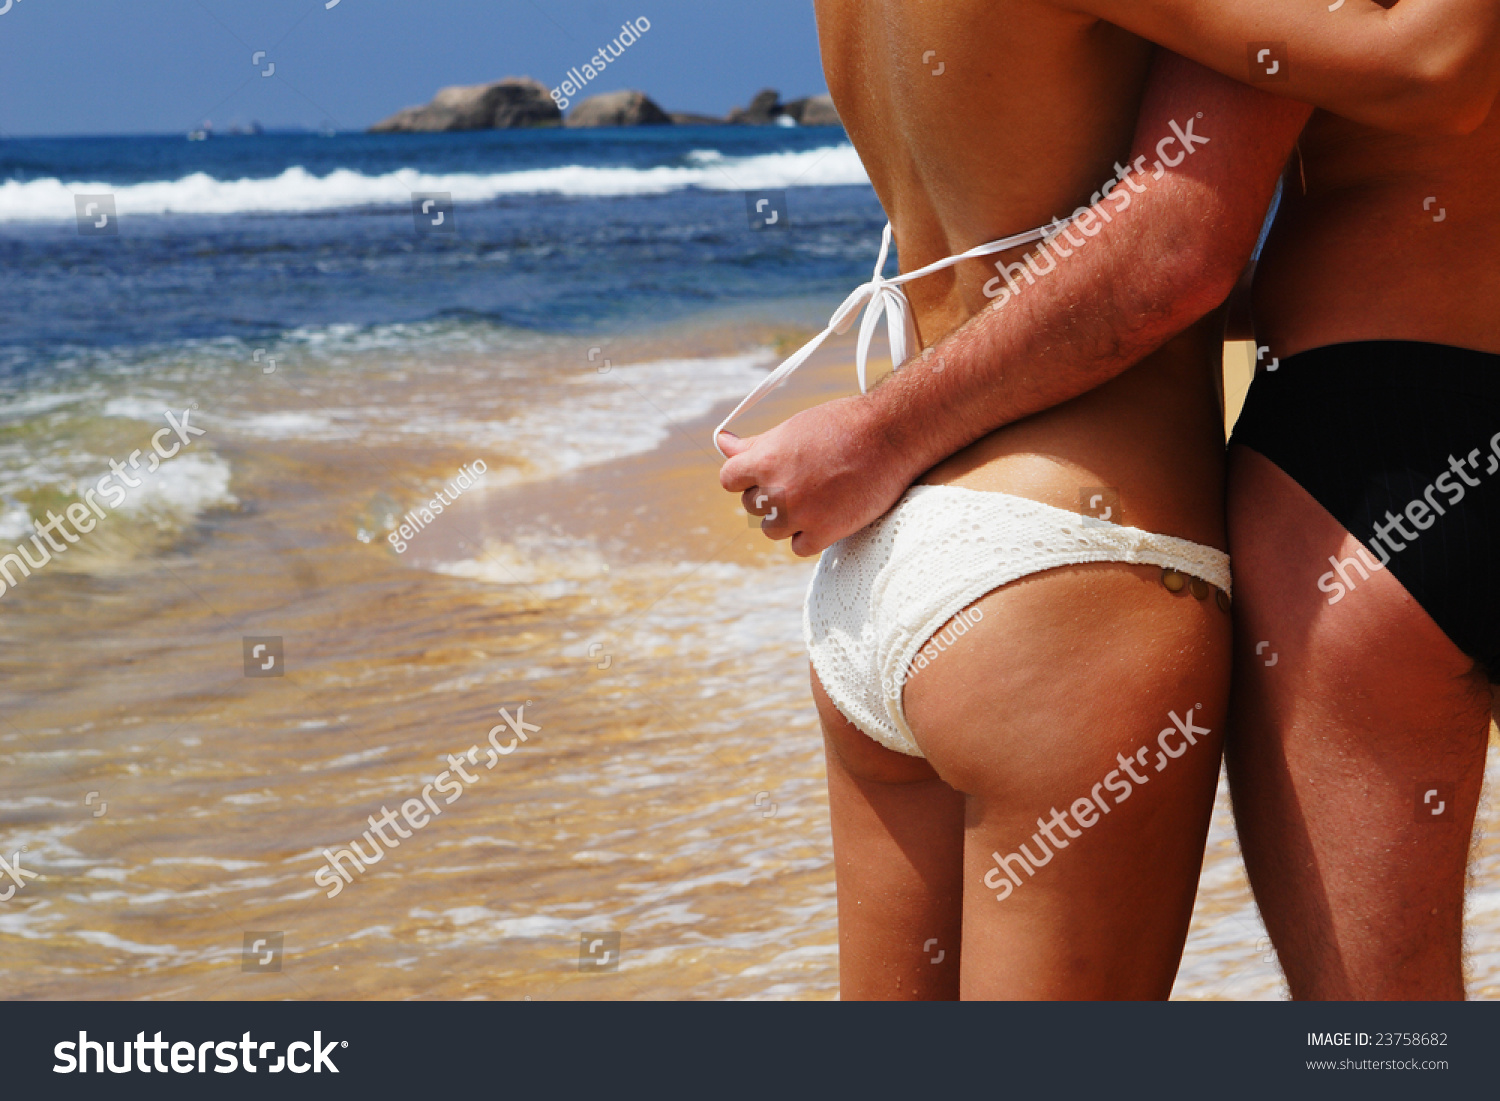 Young suntanned man and the woman in bathing suits embrace on an ocean coast #23758682